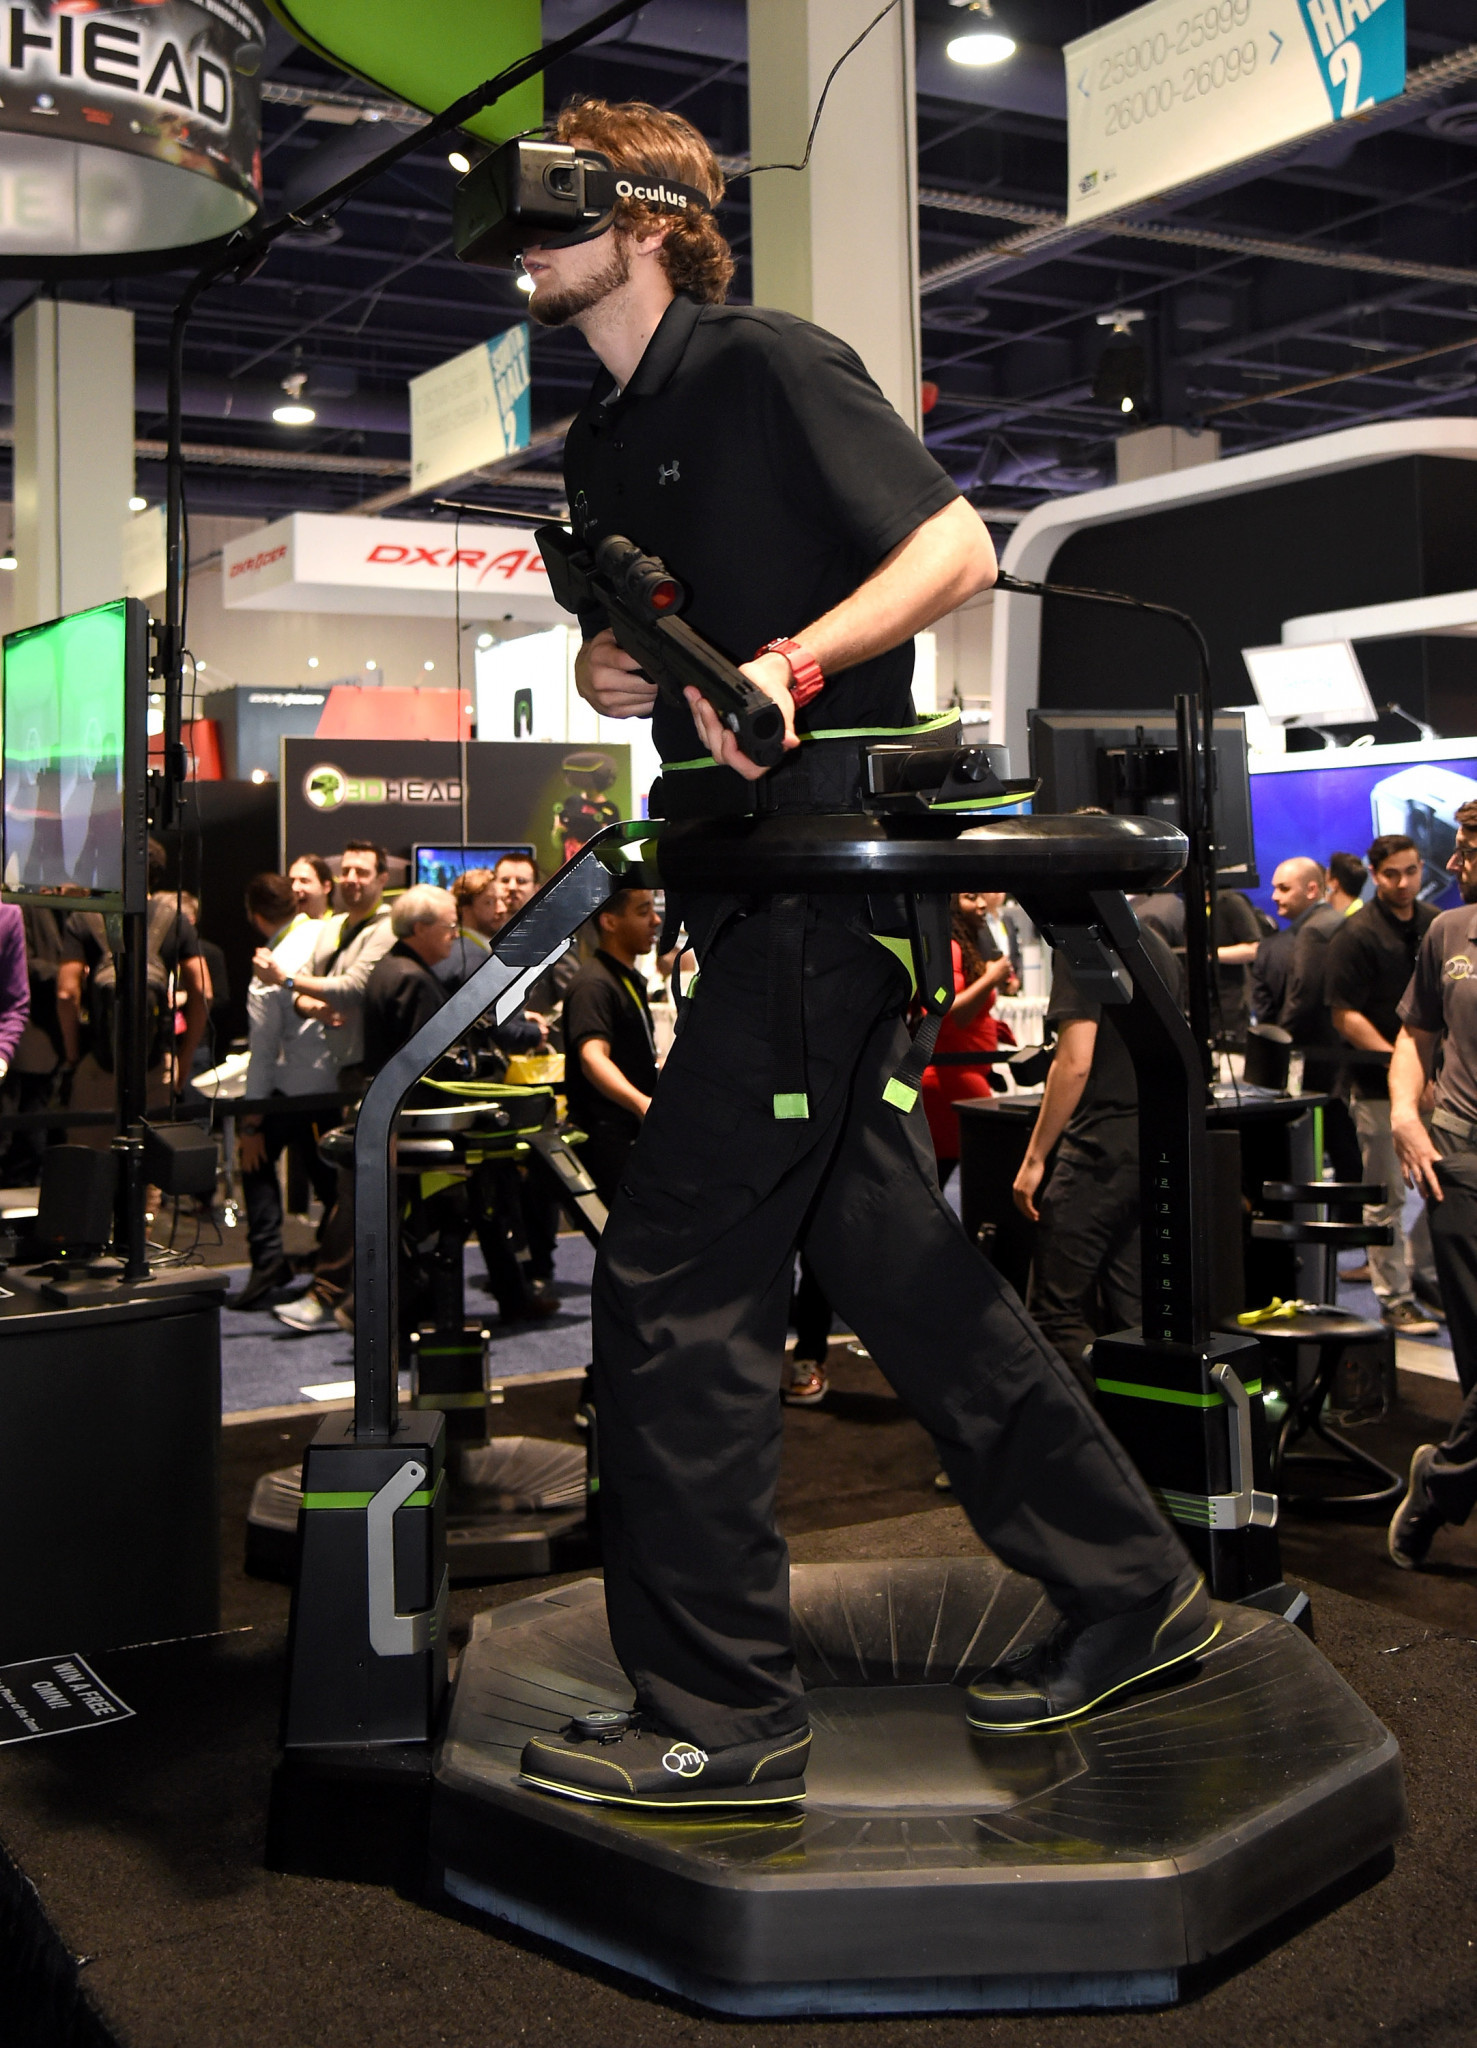 Omni directional treadmills are already available, at a price ©Getty Images